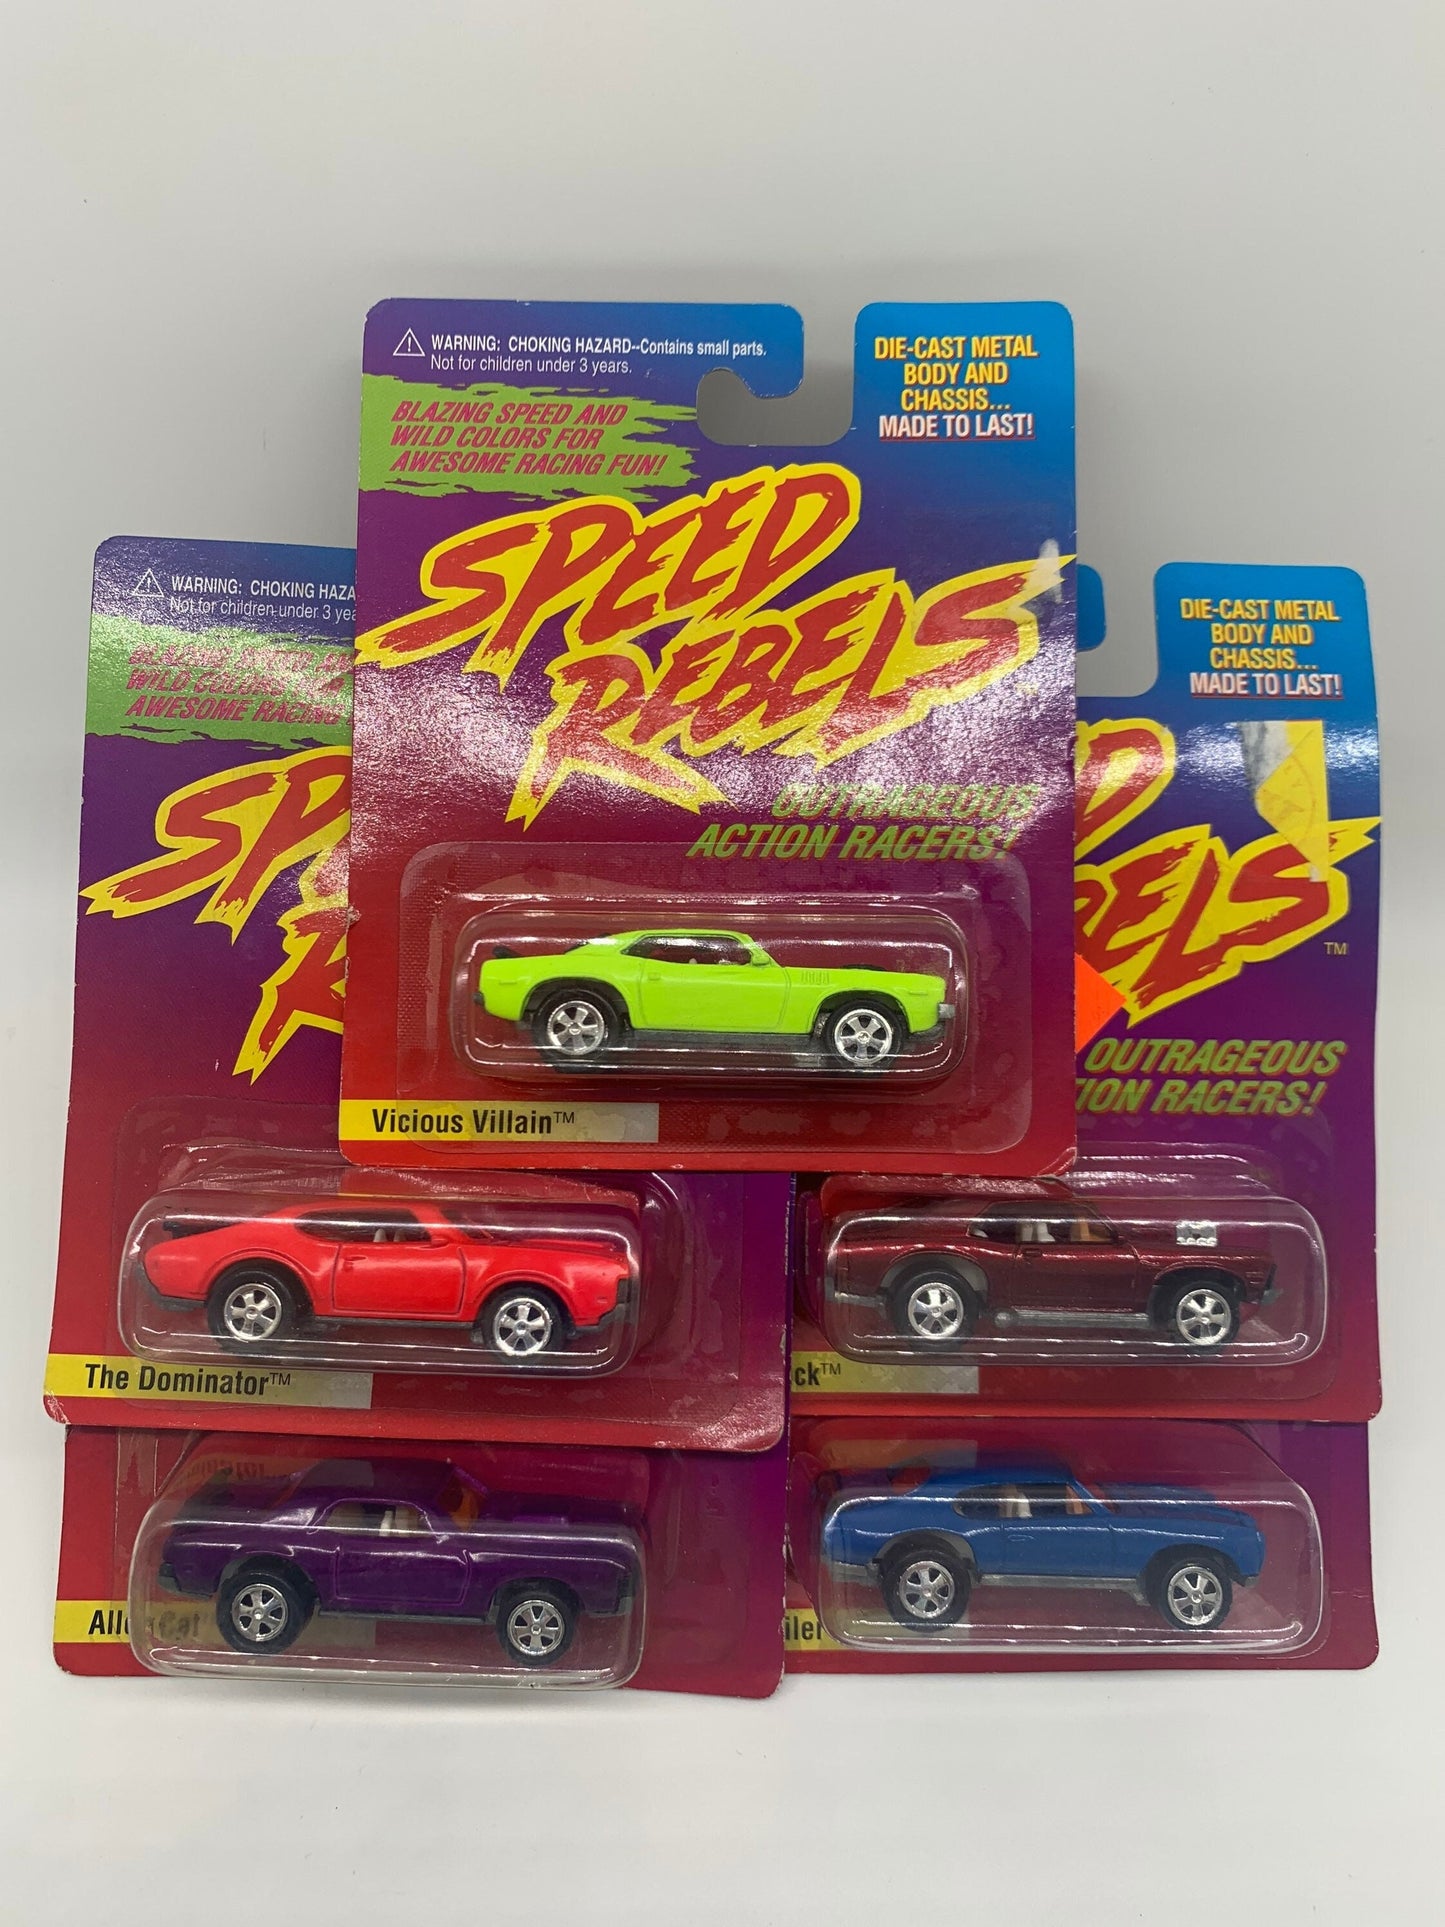 Speed Rebels Muscle Car Collectable Scale Model Miniature Toy Car Lot Perfect Birthday Gift